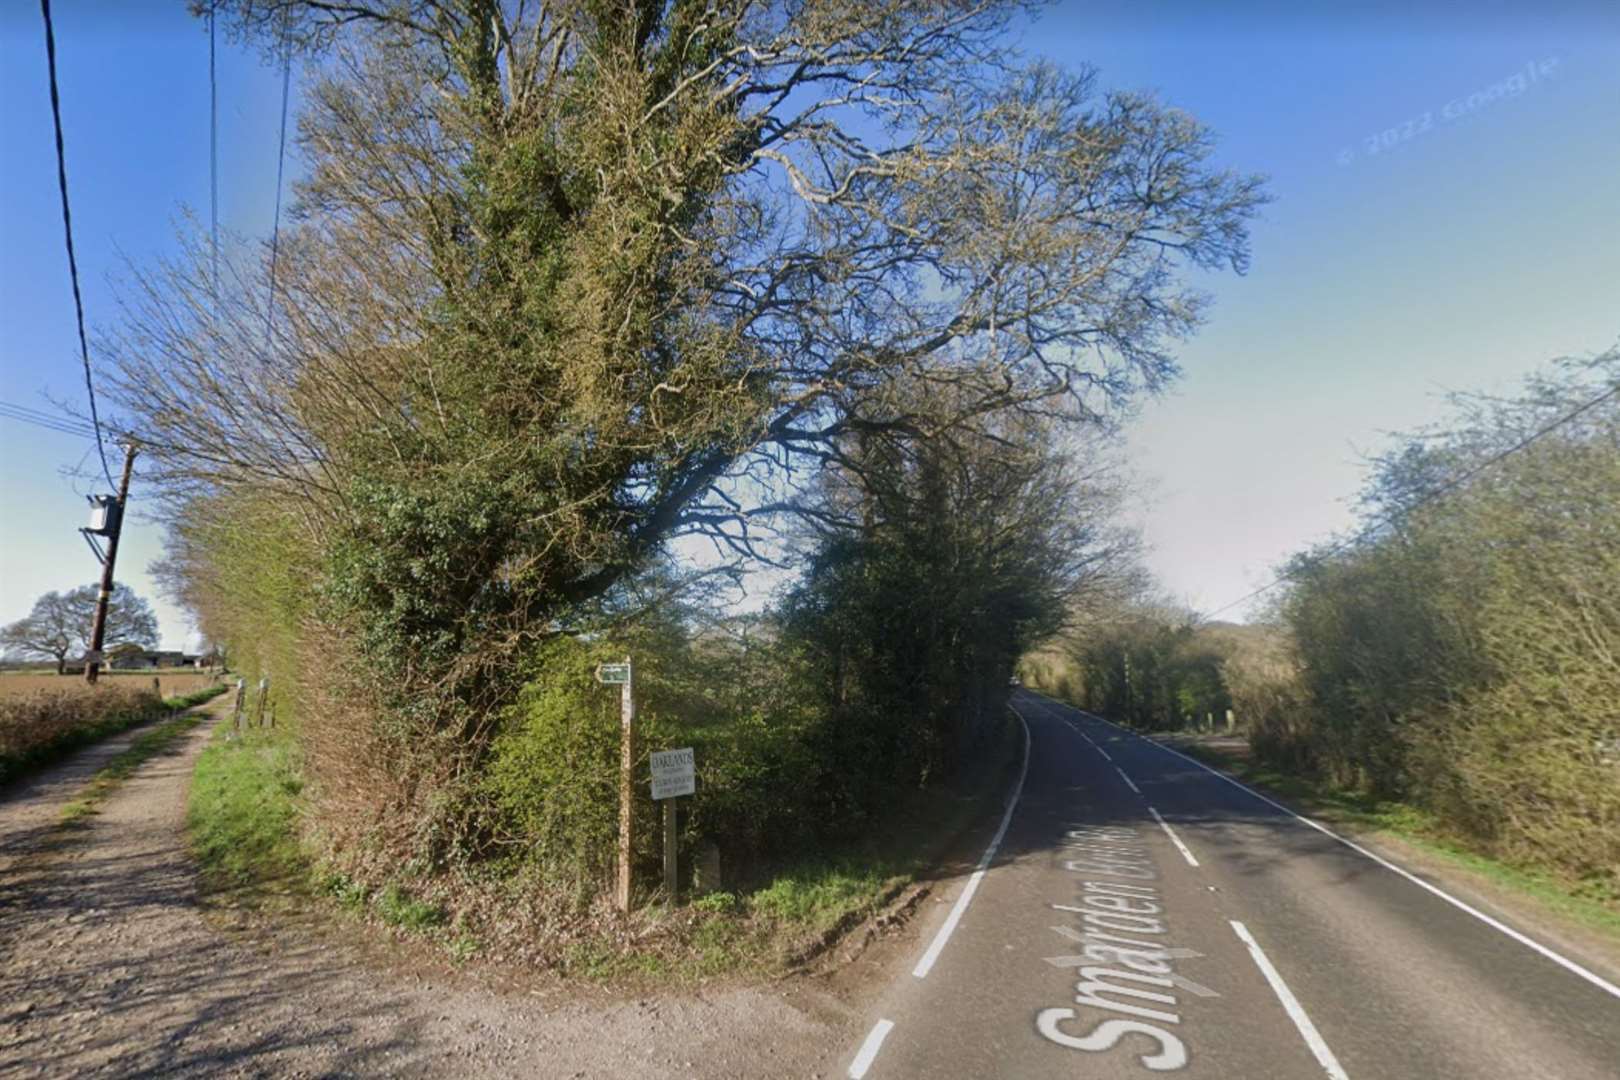 The incident happened in Smarden Bell Road in Pluckley. Picture: Google Maps